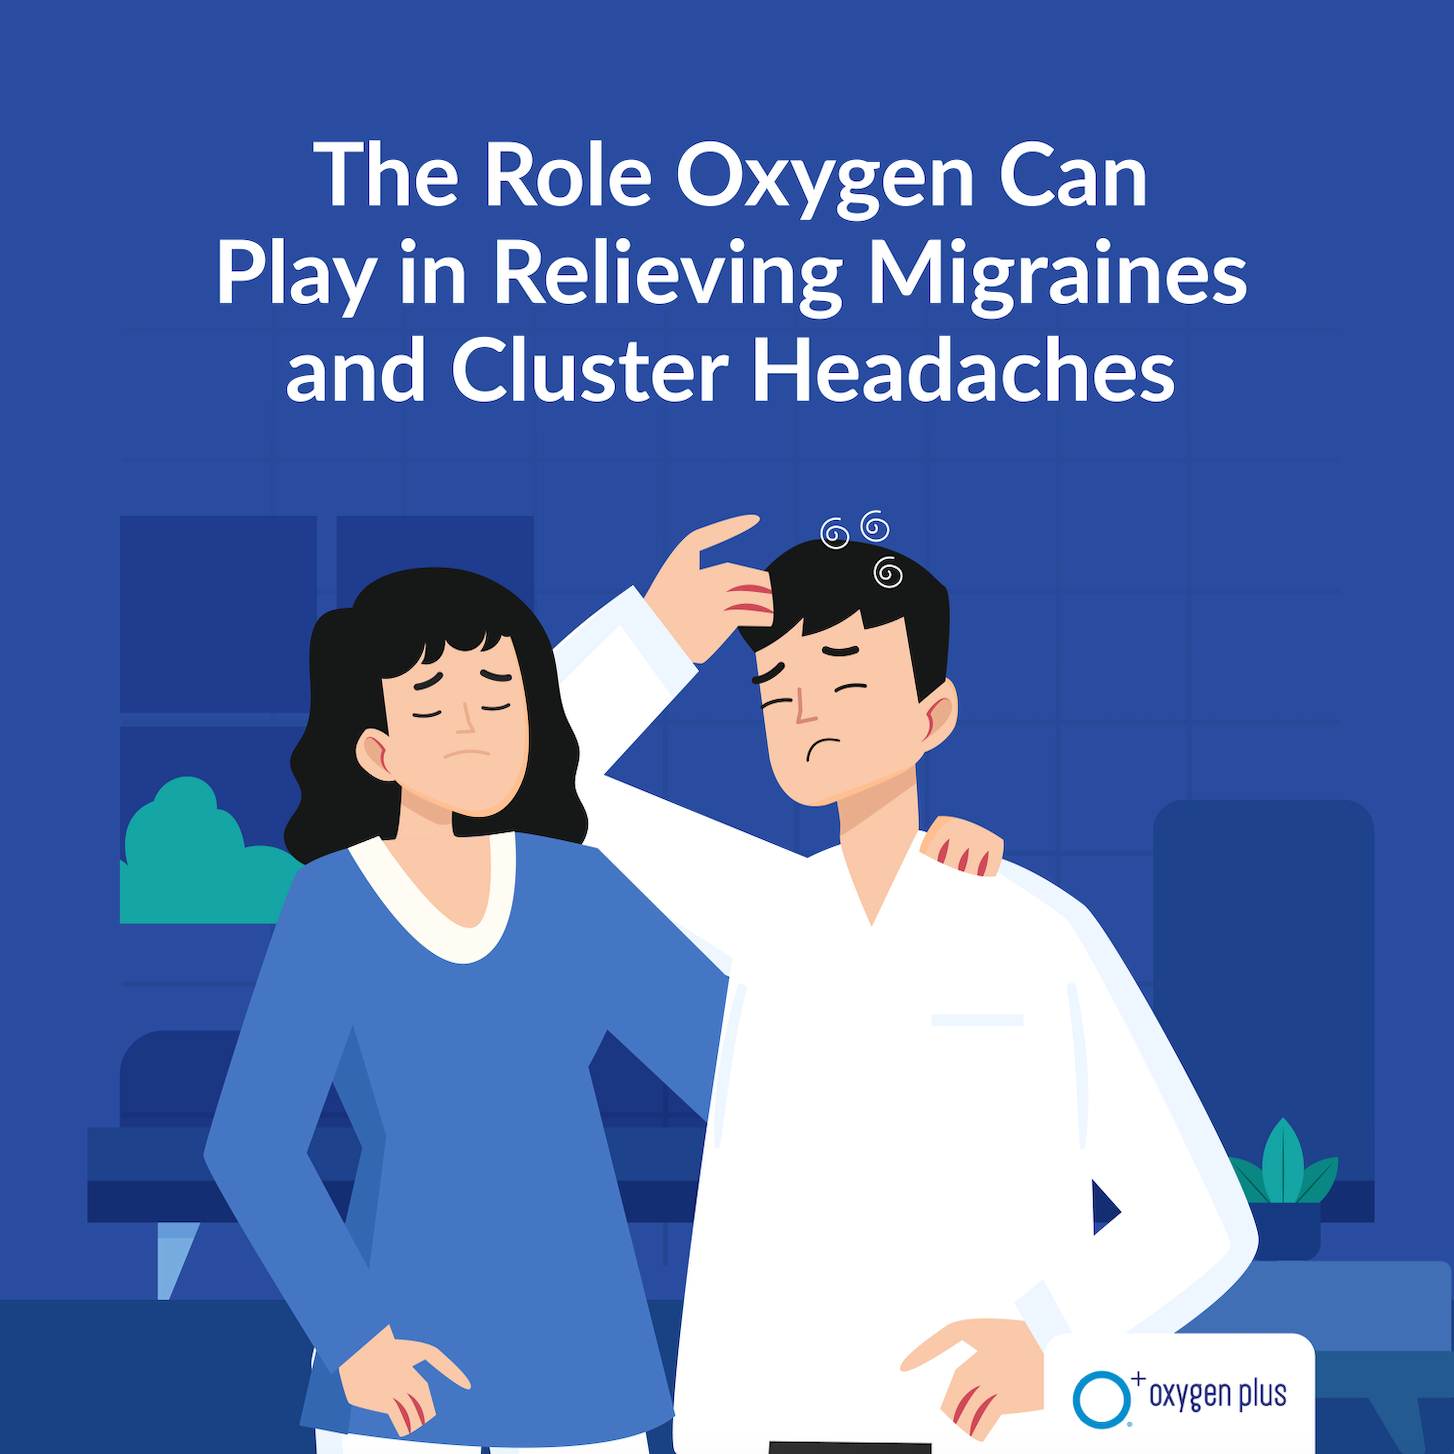 The Role Oxygen Can Play in Relieving Migraines and Cluster Headaches